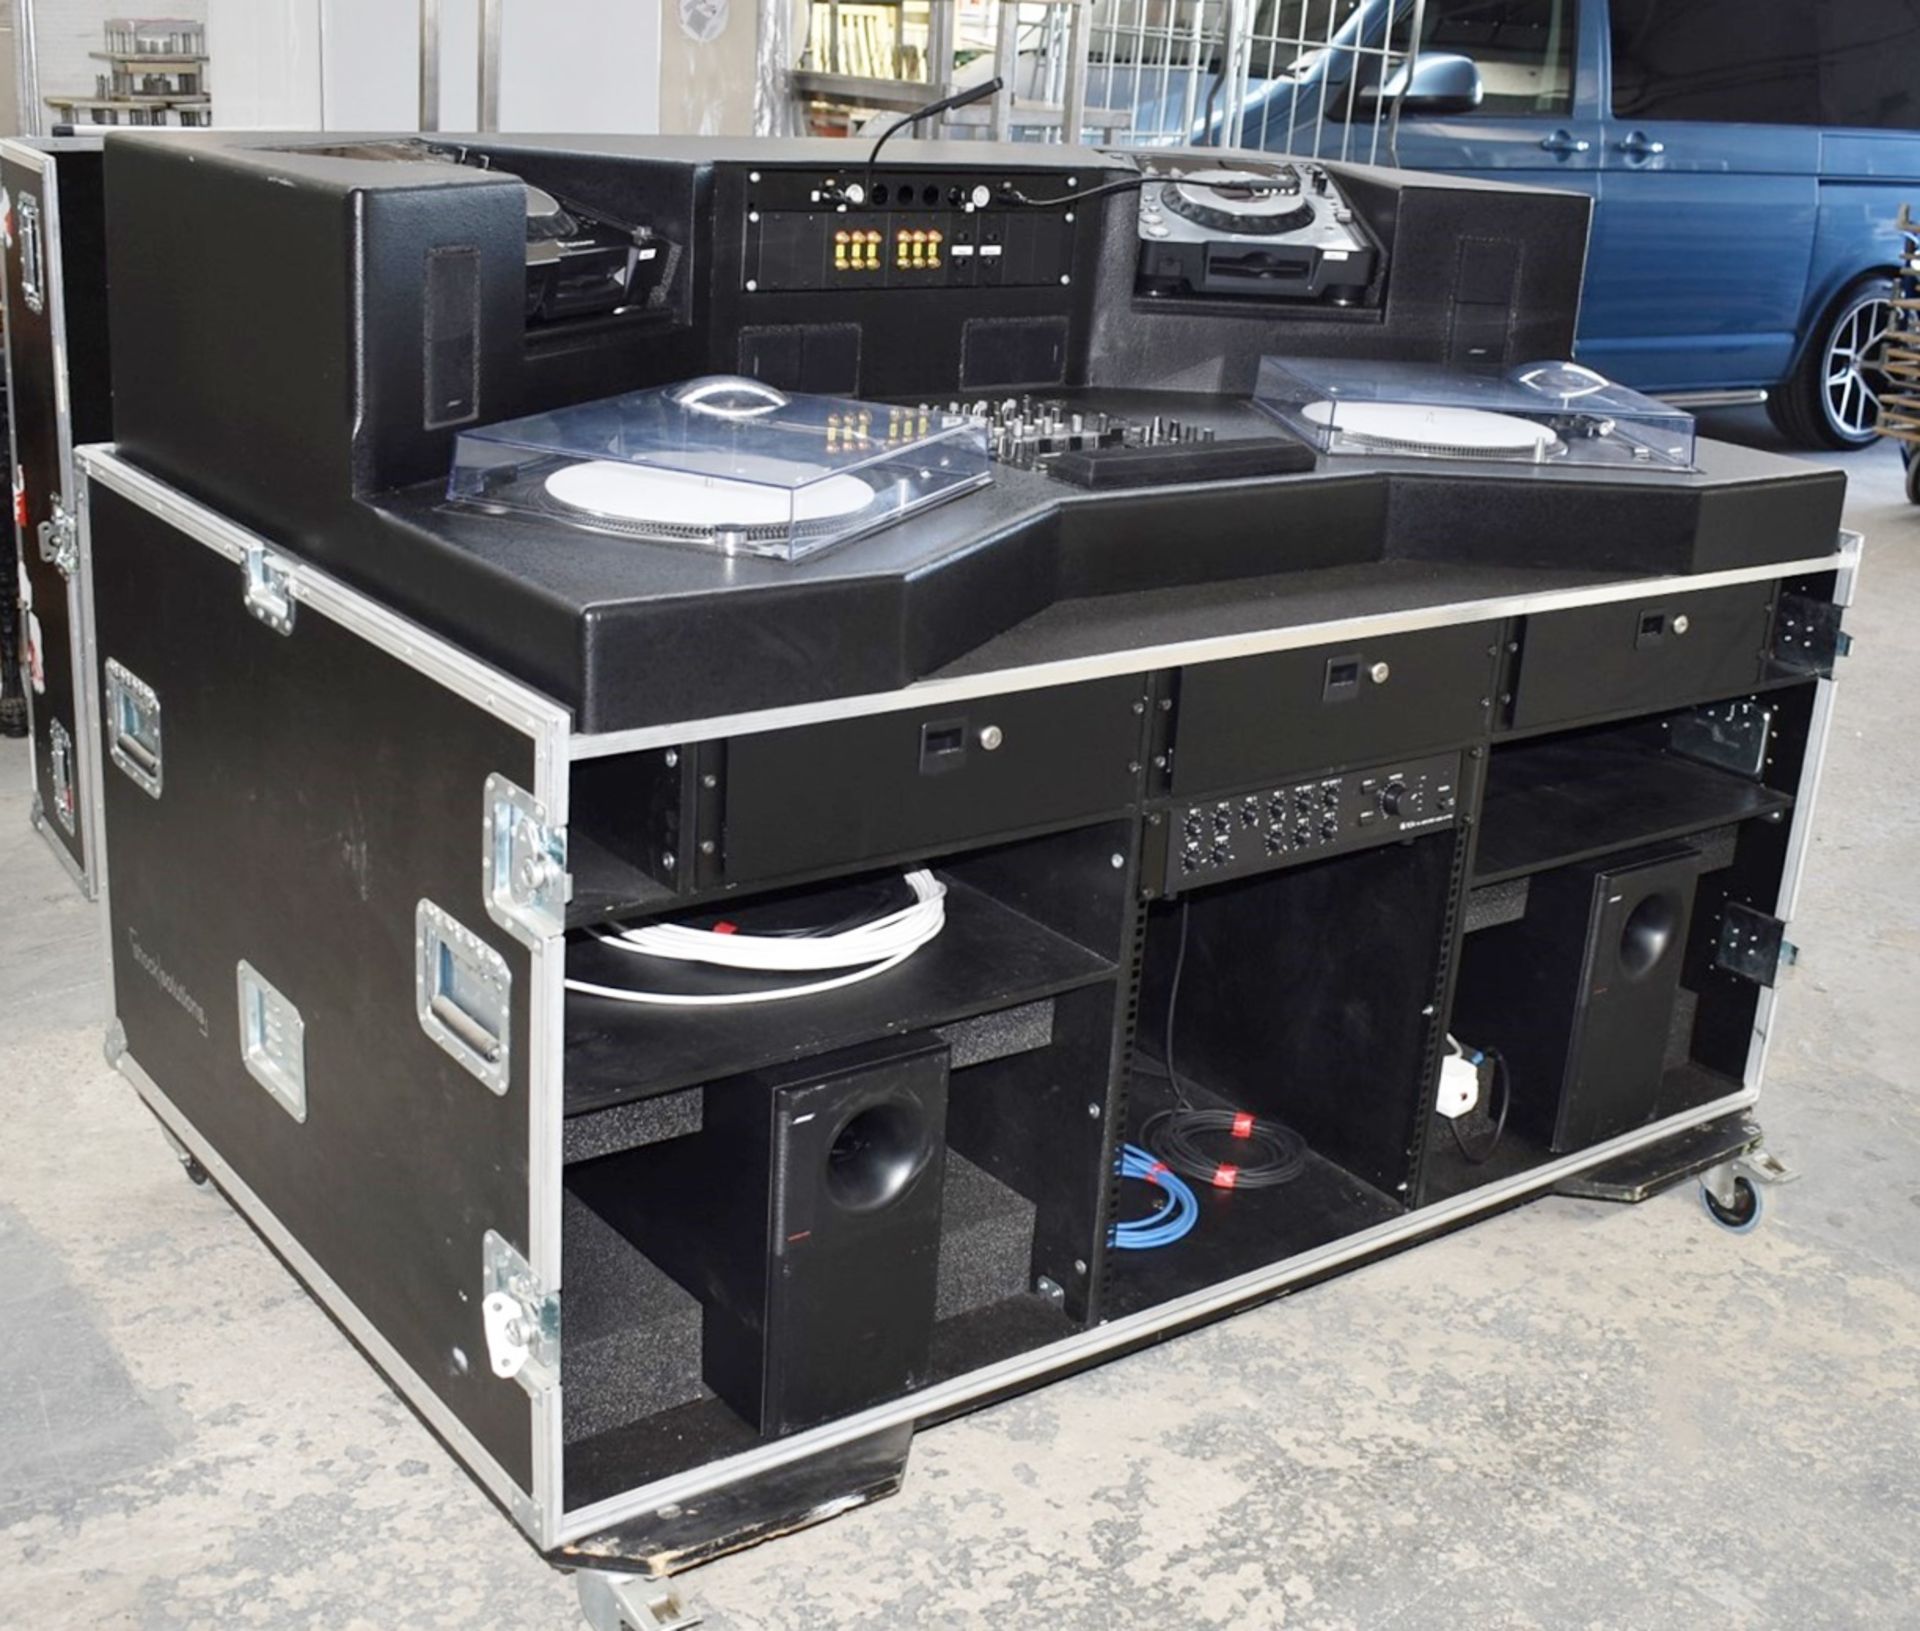 1 x Mobile DJ Booth in Shock Solutions Flight Case - Features Equipment By Pioneer, Technics & Bose! - Image 3 of 95